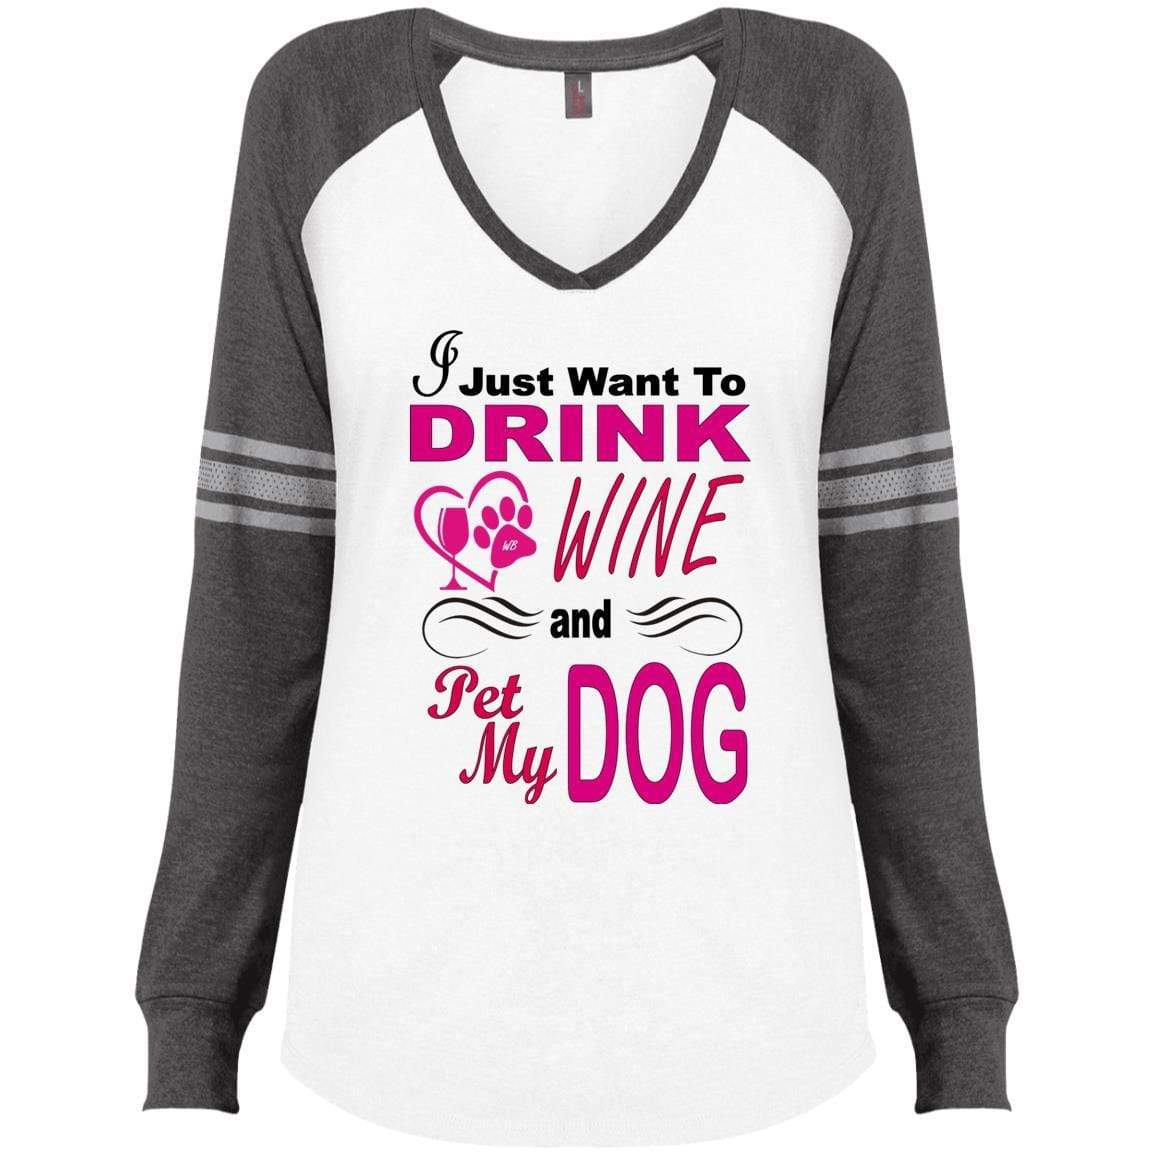 T-Shirts White/Heathered Charcoal / X-Small WineyBitches.co Hilariously Funny "I Just Want To Drink Wine & Pet My Dog" V-neck WineyBitchesCo